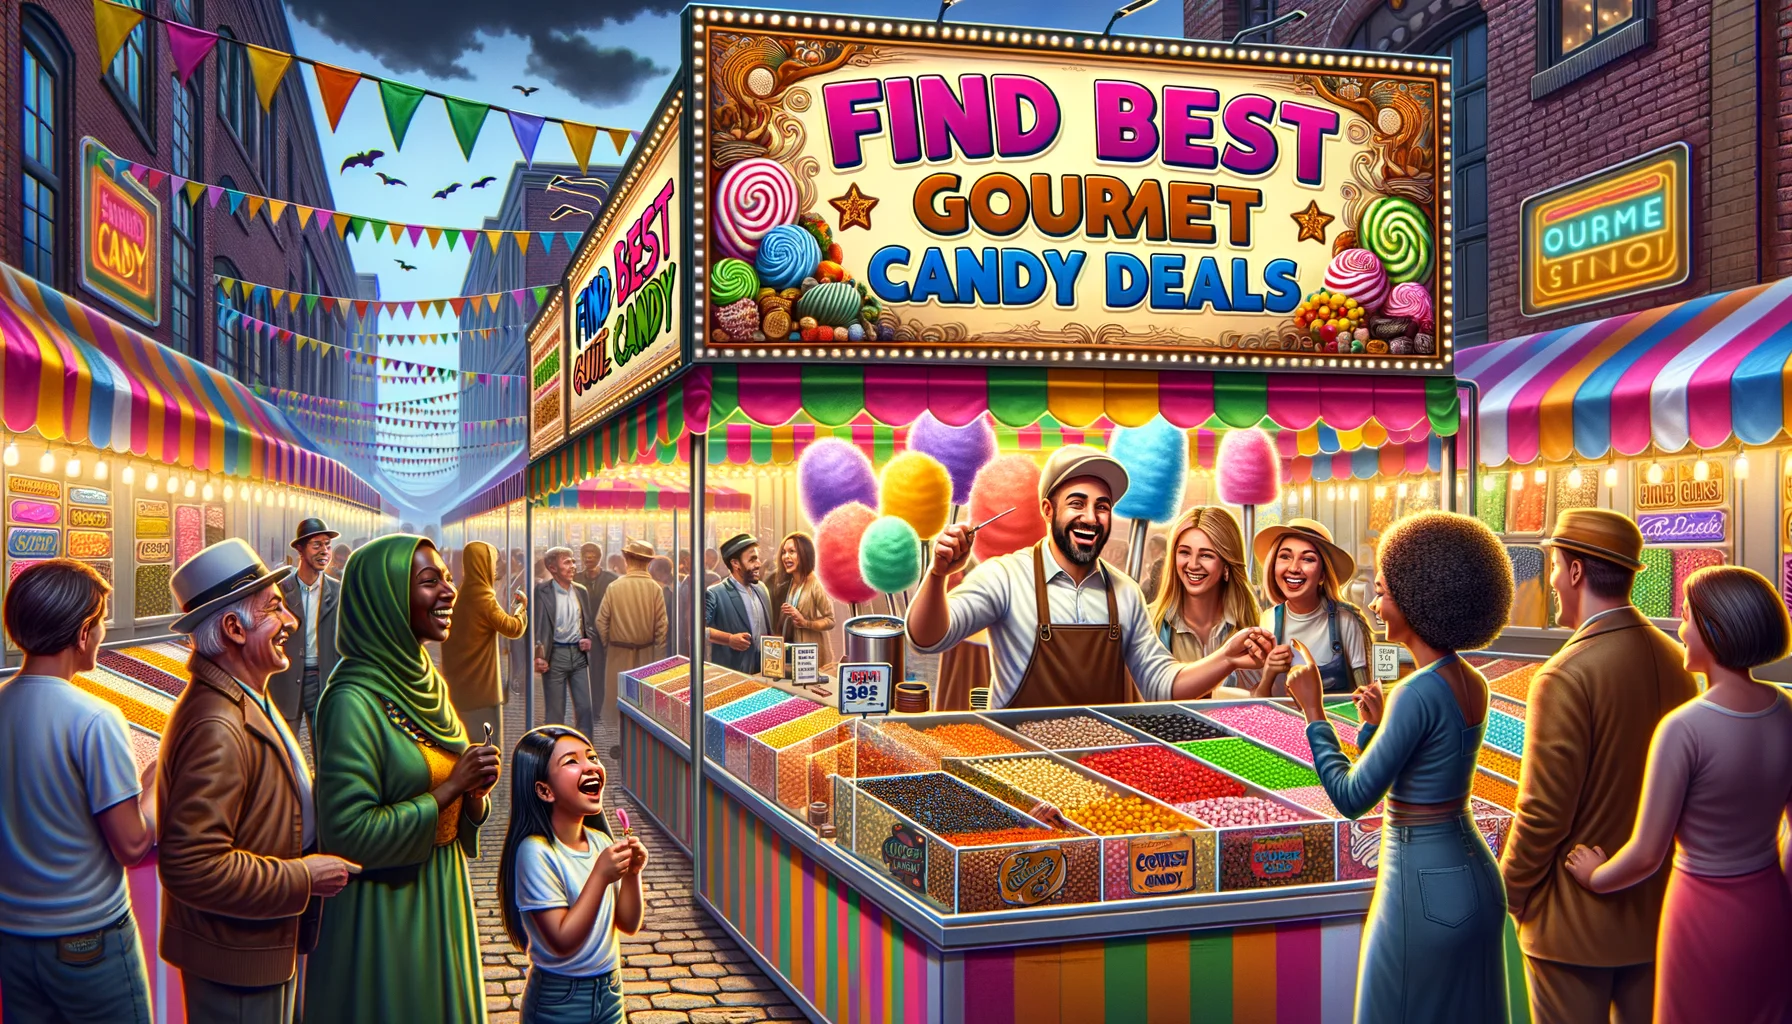 Imagine a bustling candy fair with a festive vibe. Center stage is a gigantic, brightly colored banner that reads 'Find Best Gourmet Candy Deals'. The stalls are run by cheerful vendors of different descents, from Middle-Eastern to Hispanic, each showcasing colorful and mouth-watering gourmet candies. Below the banner, a broad, smiling Caucasian male vendor shows a customer the candy under a glass display, both laughing at some shared joke. In the foreground, a young black girl is ecstatically pointing at a cotton candy stall, run by a South Asian woman. Defining feature of this scenario is its joyful, light-hearted and realistic impression.